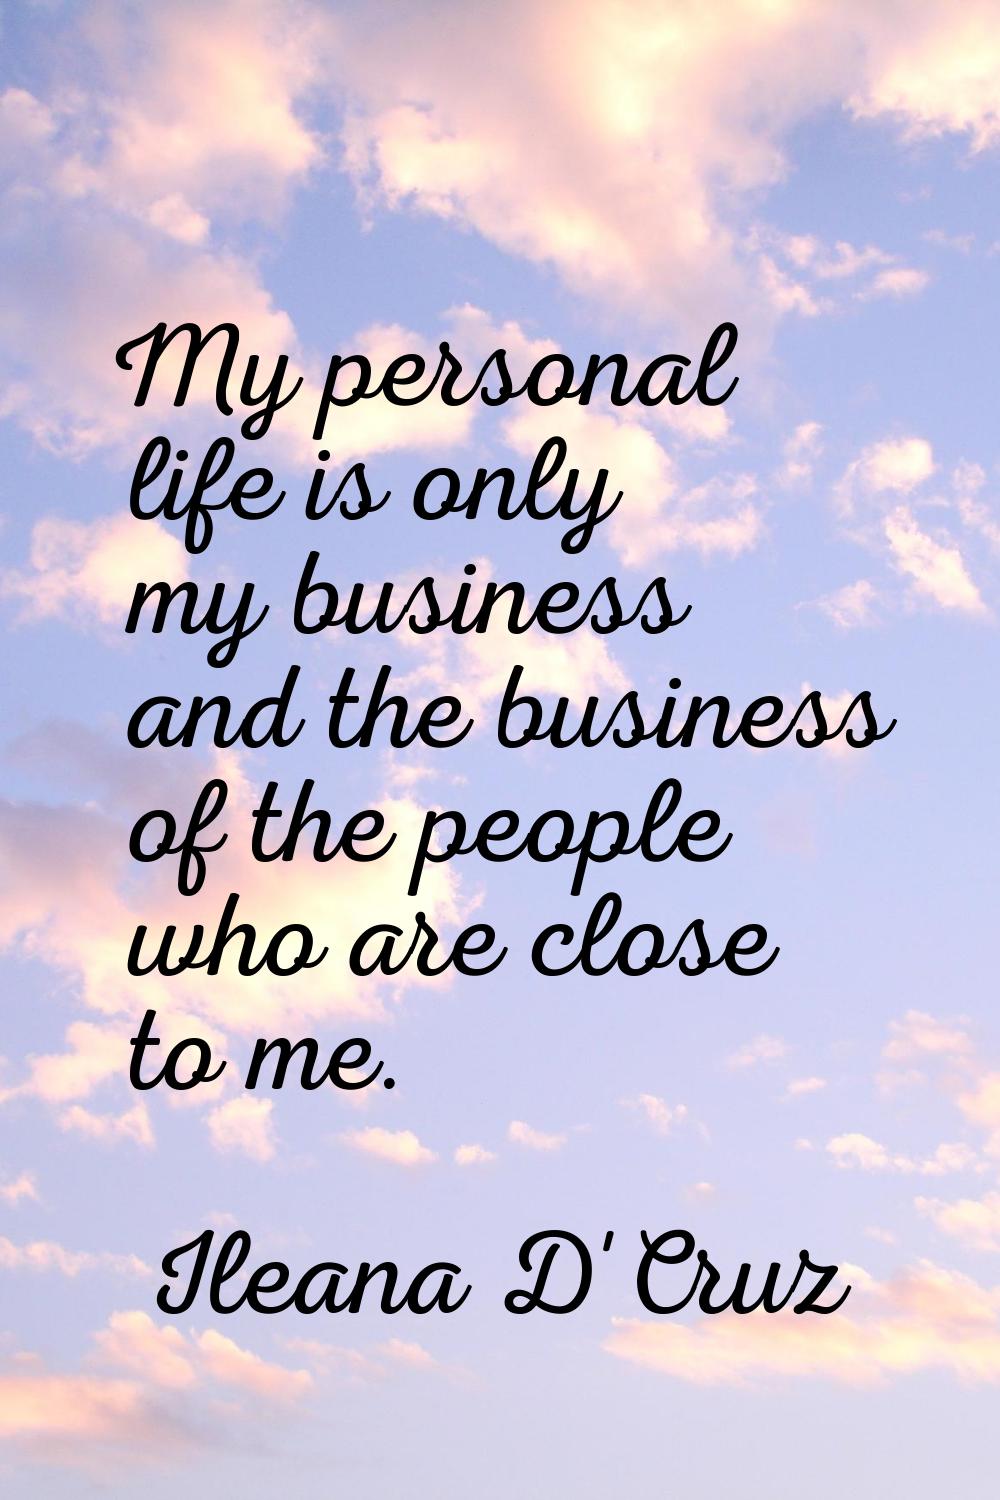 My personal life is only my business and the business of the people who are close to me.